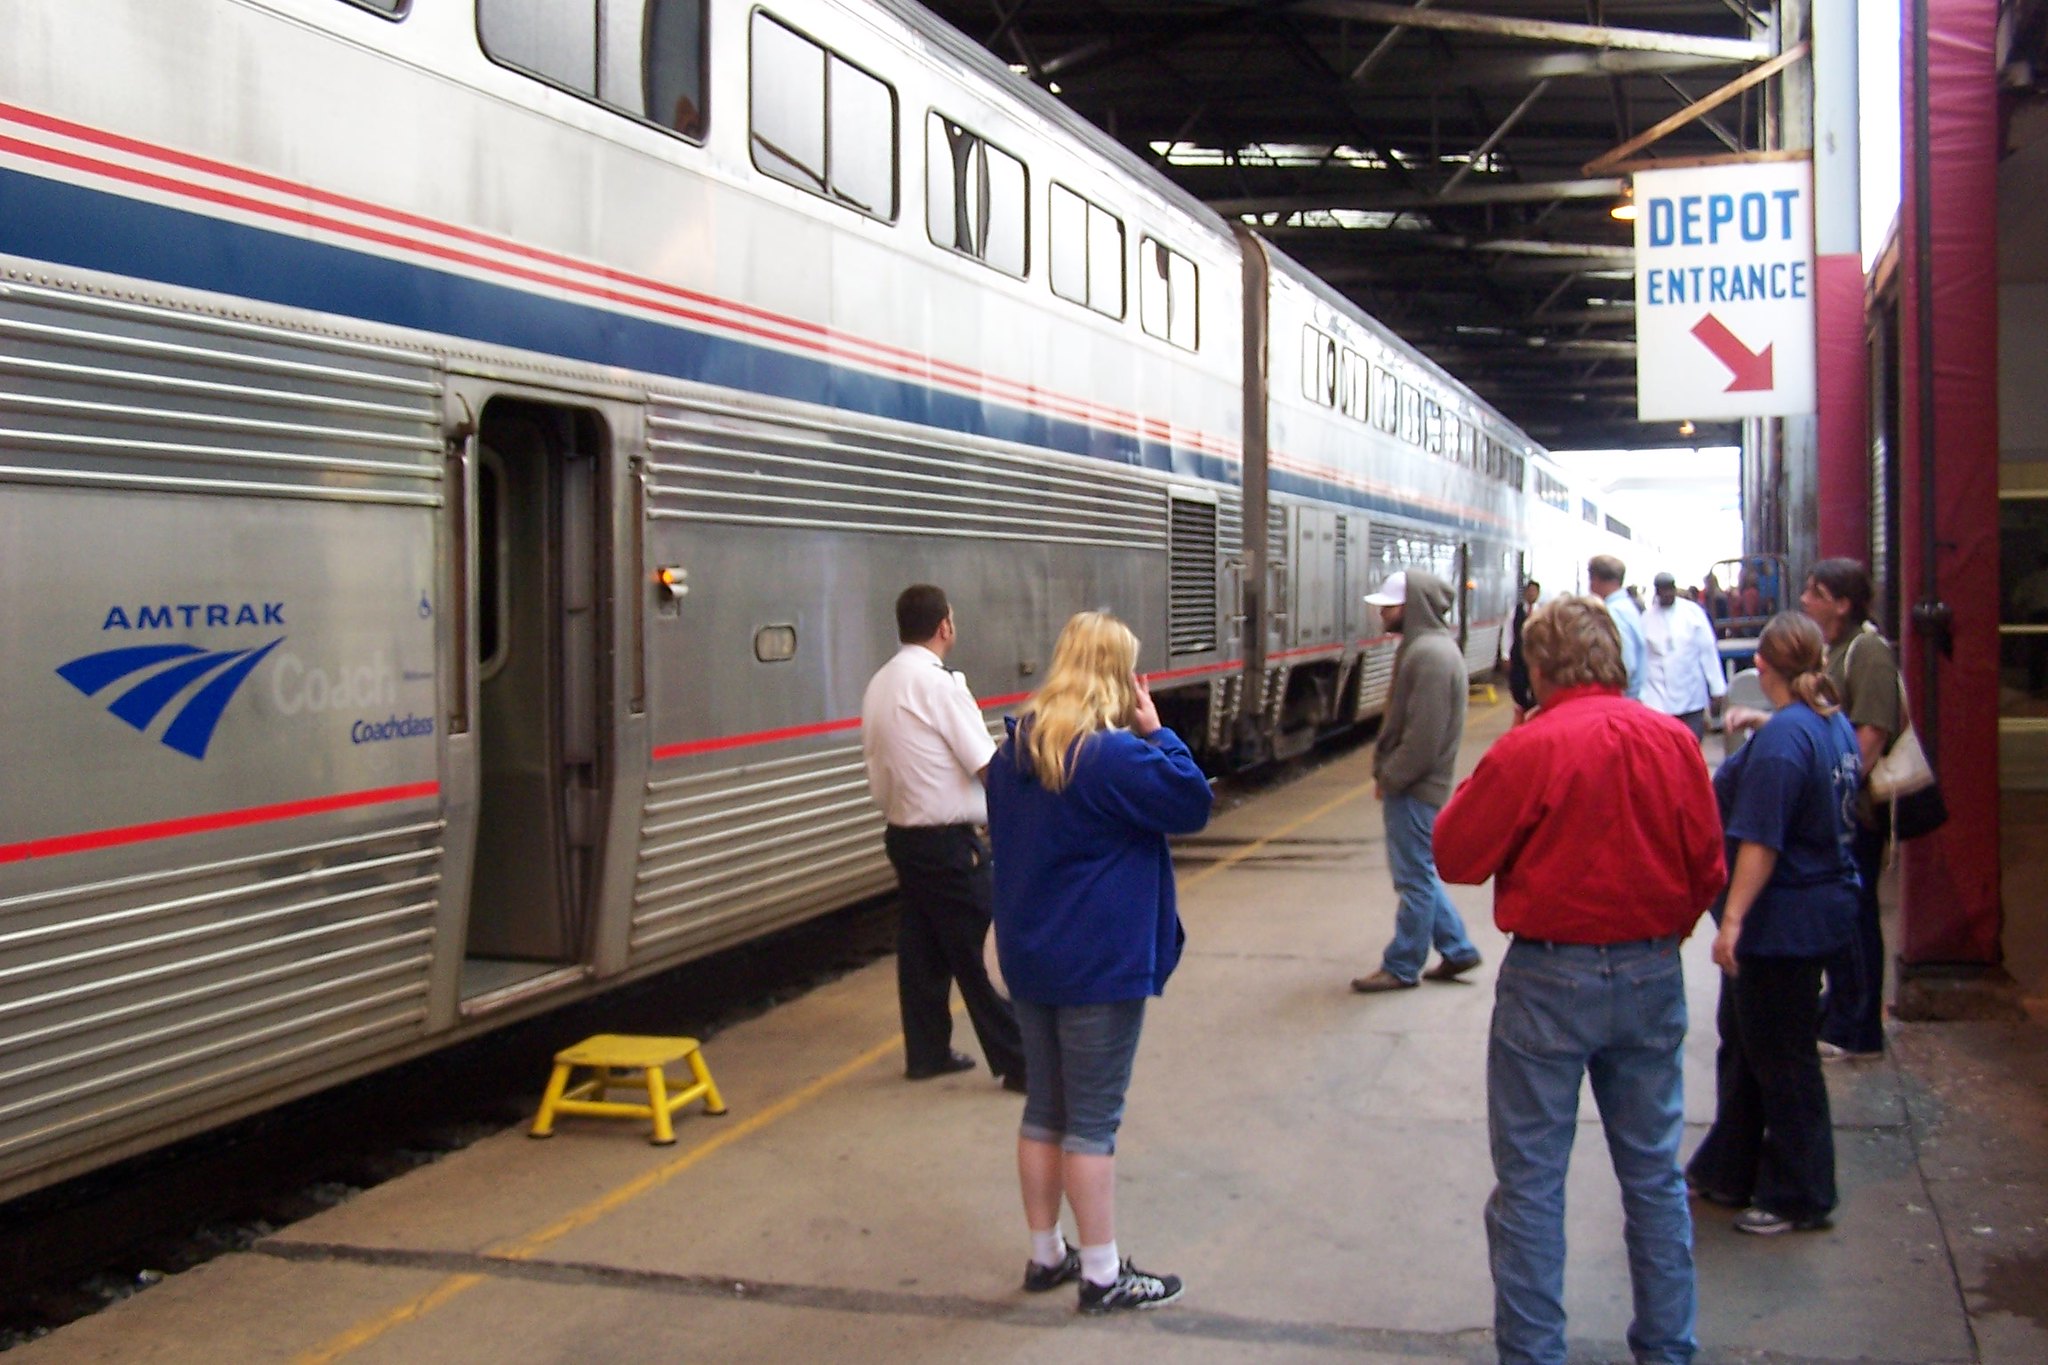 Travelers wait on the platform of the Amtrak station in Milwaukee, Wis.